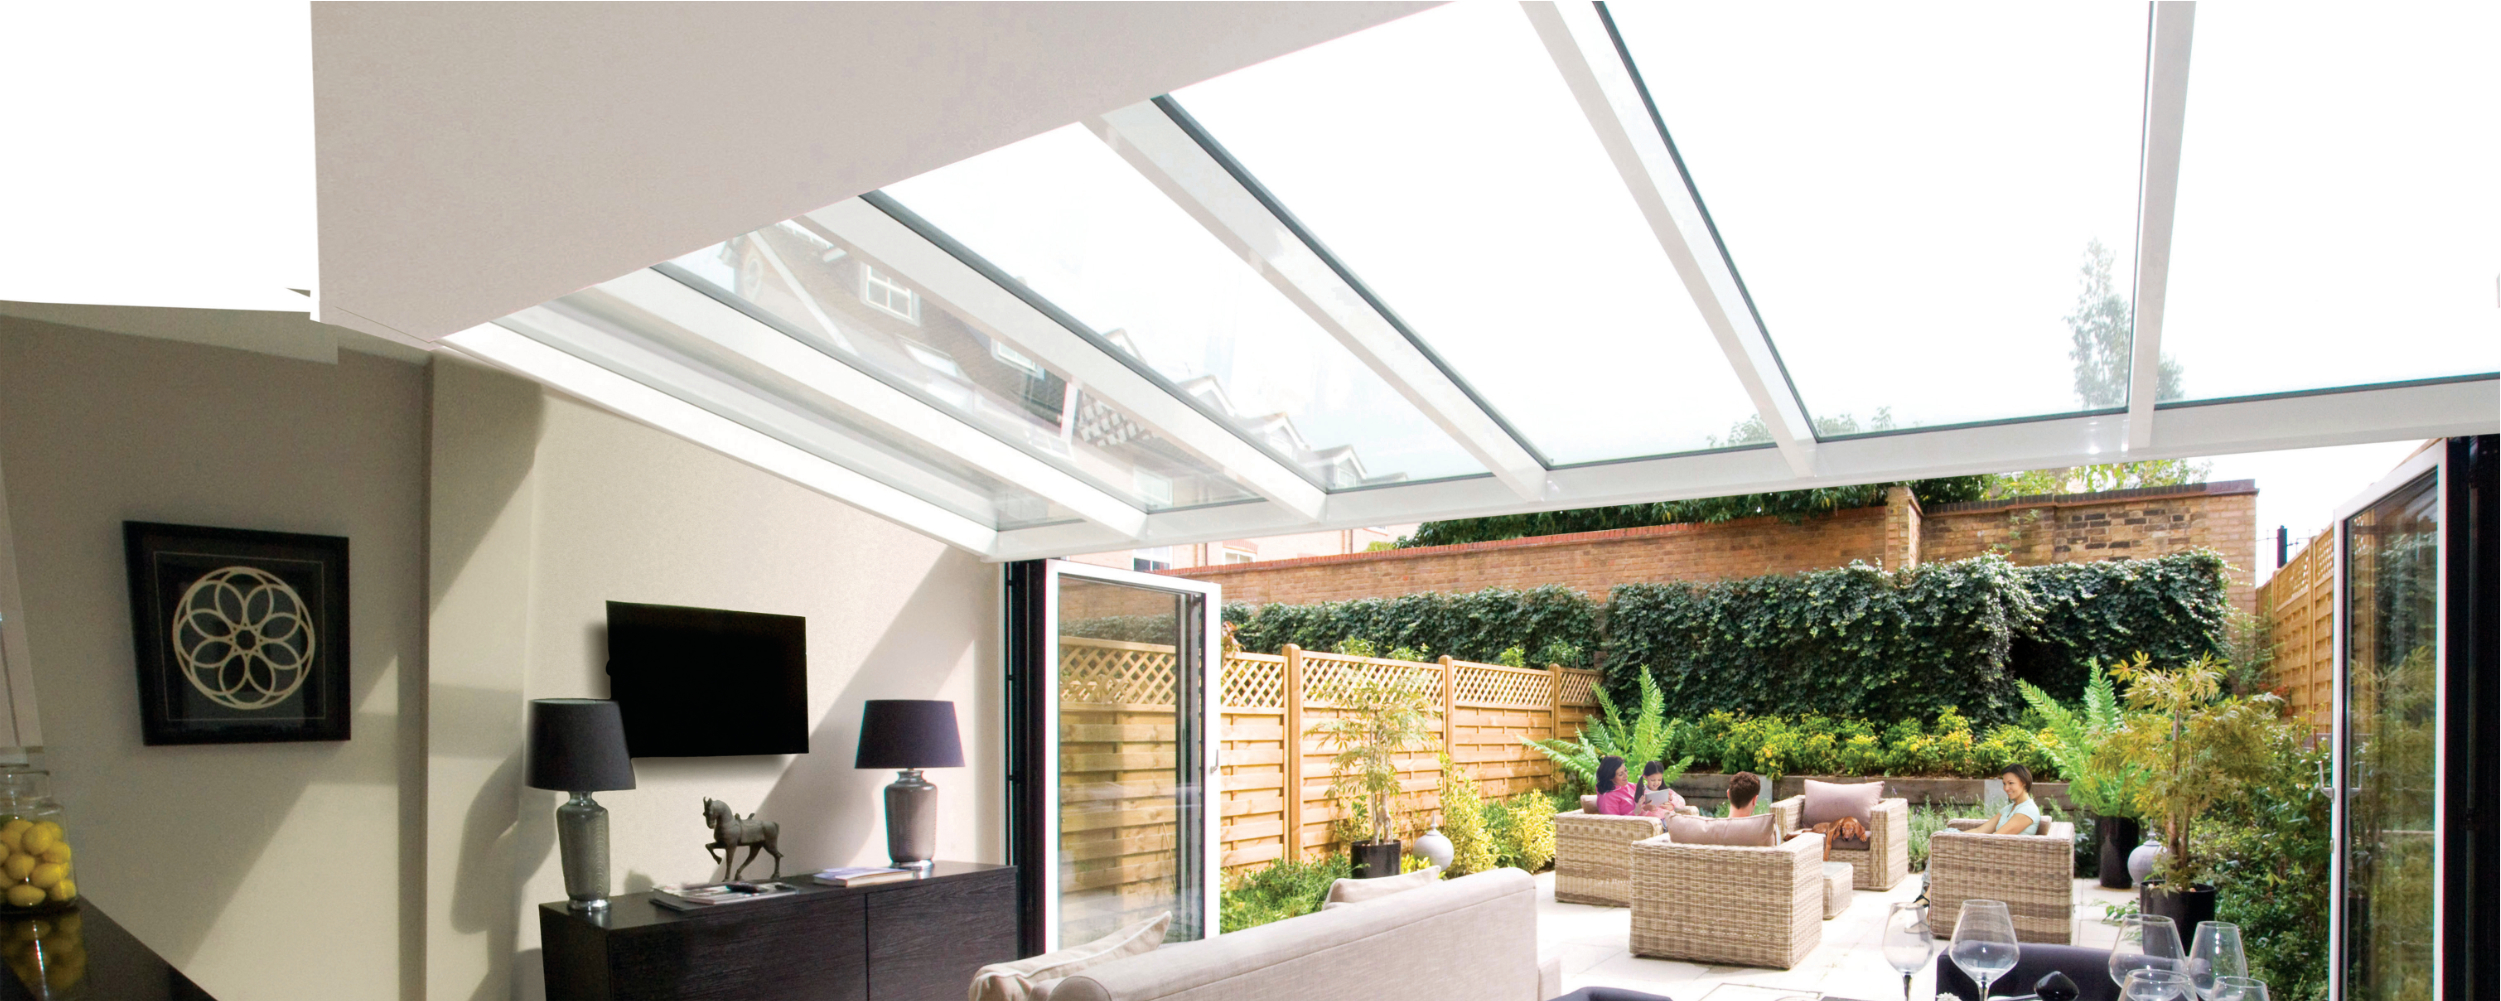 Bespoke structural glass roof installation in spectacular room setting